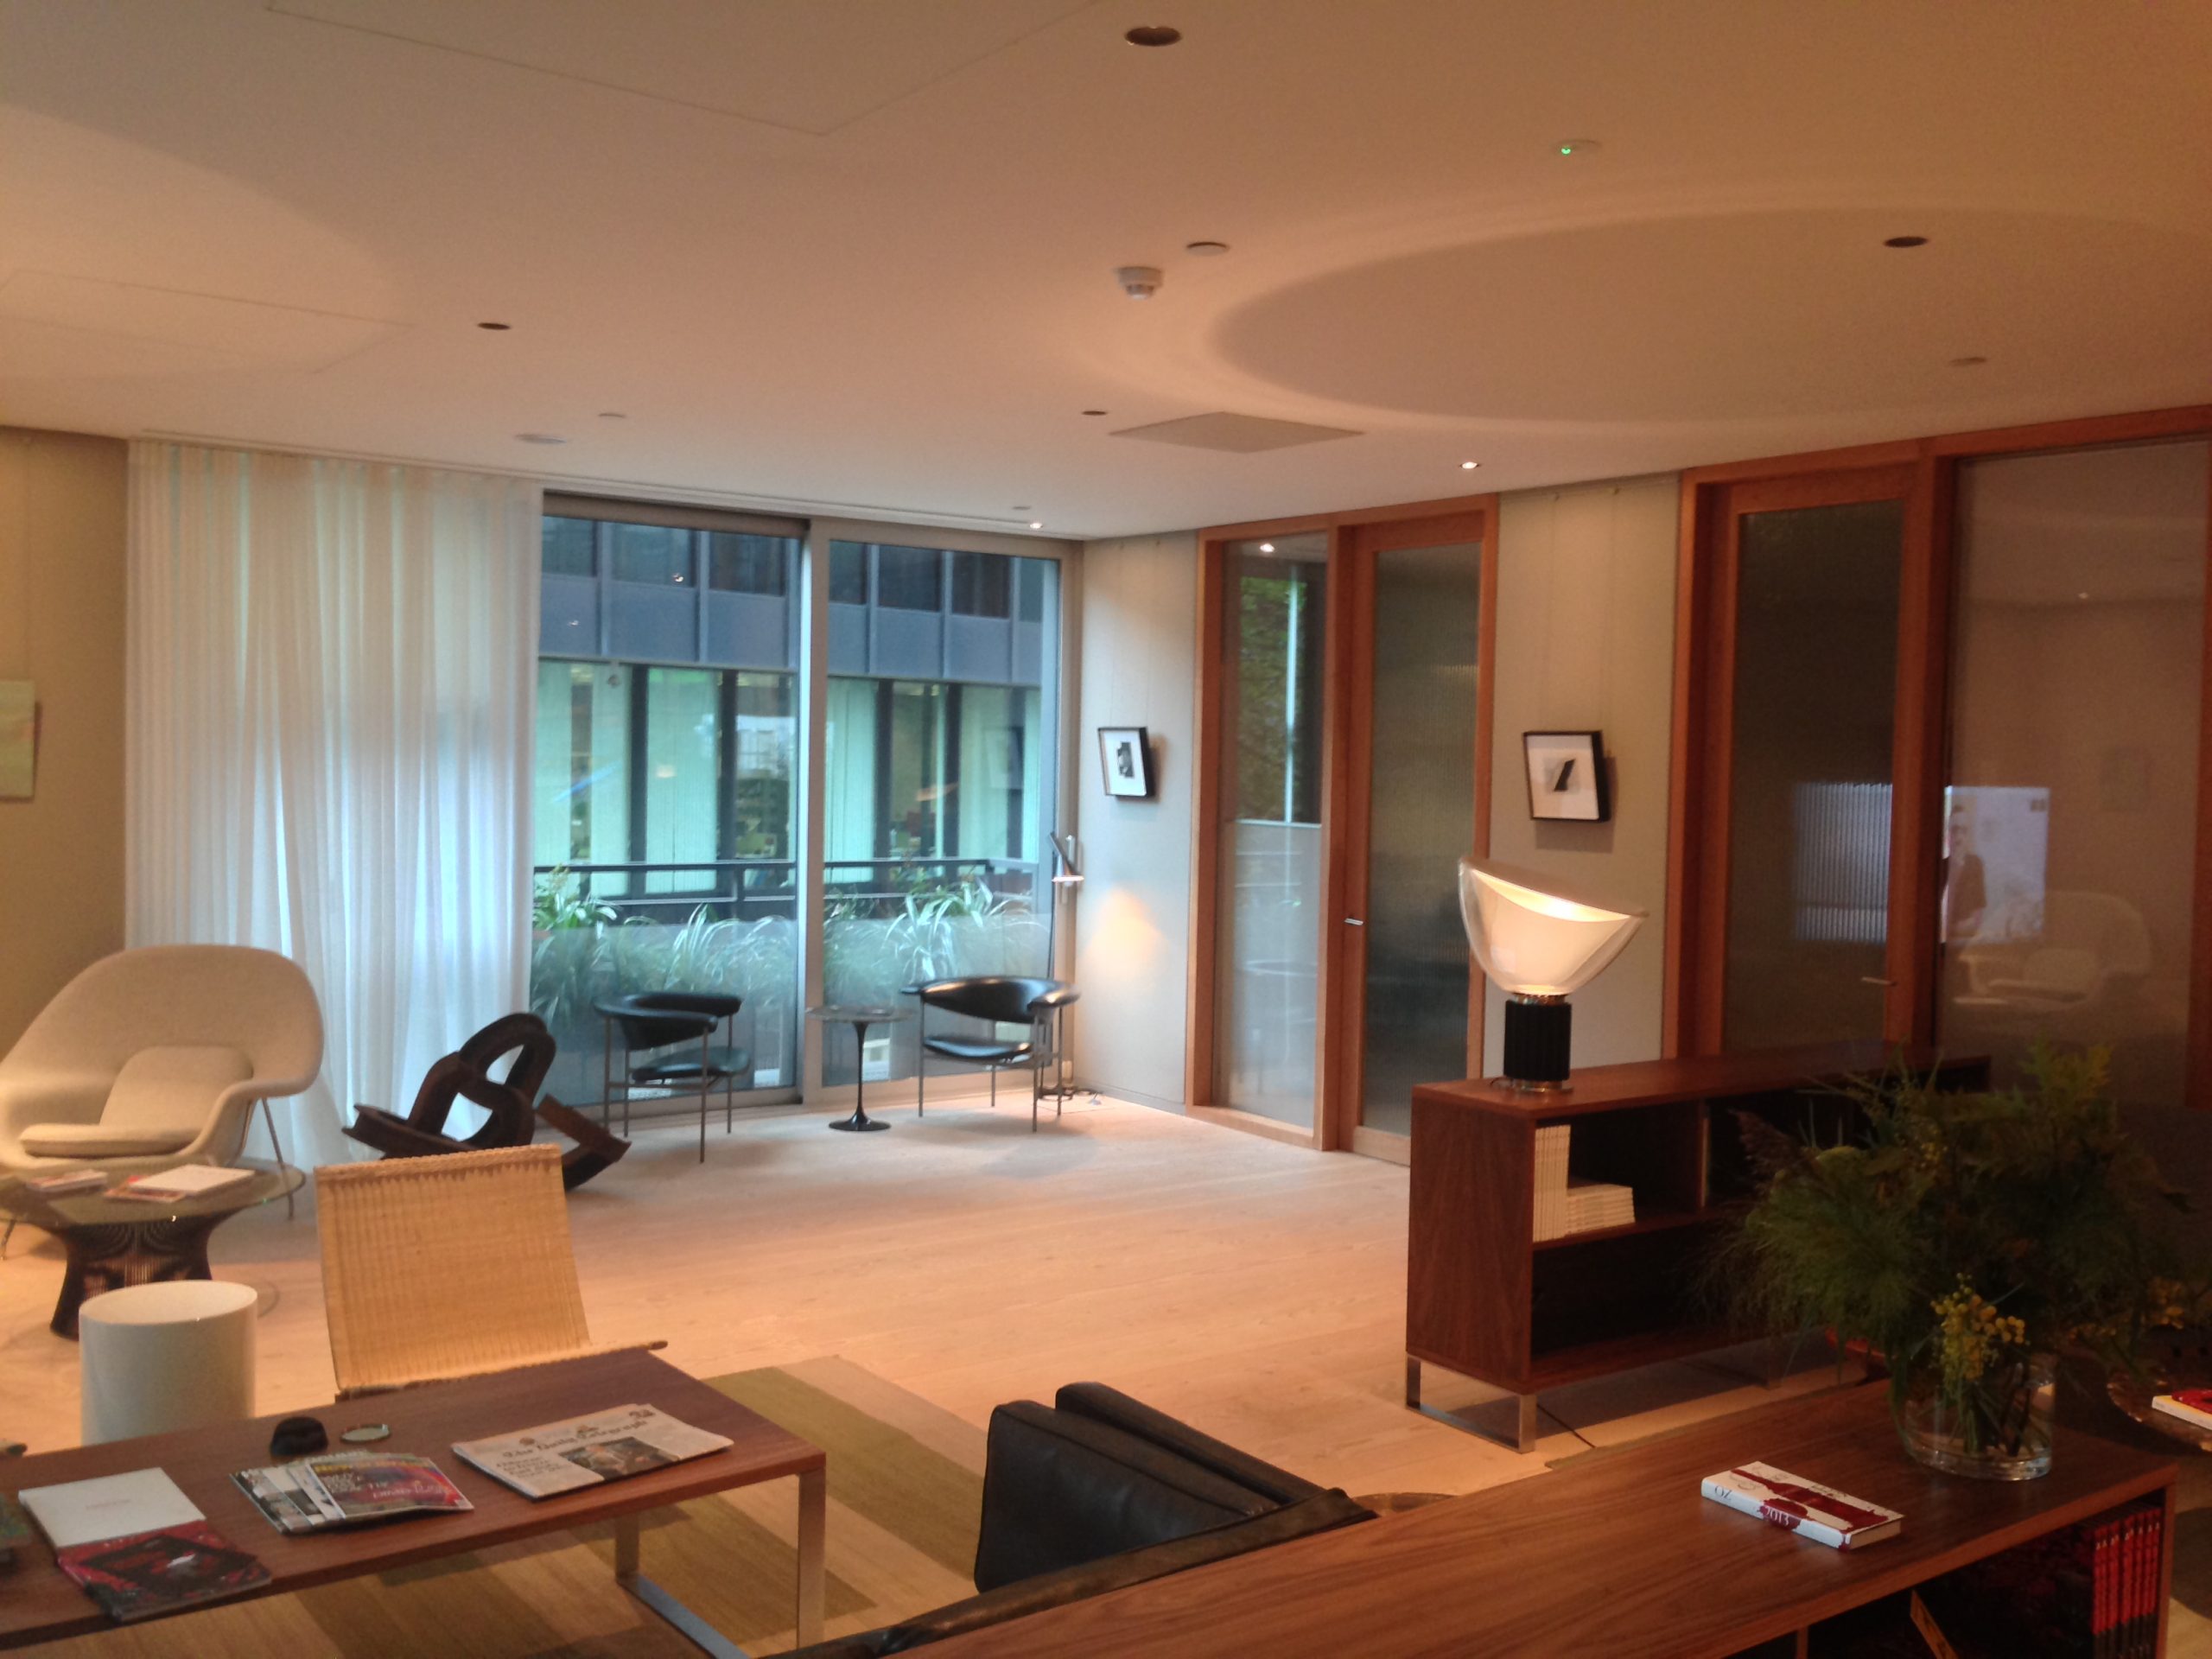 The finished reception area and meeting rooms with Lutron Energi Savr Node Lighting